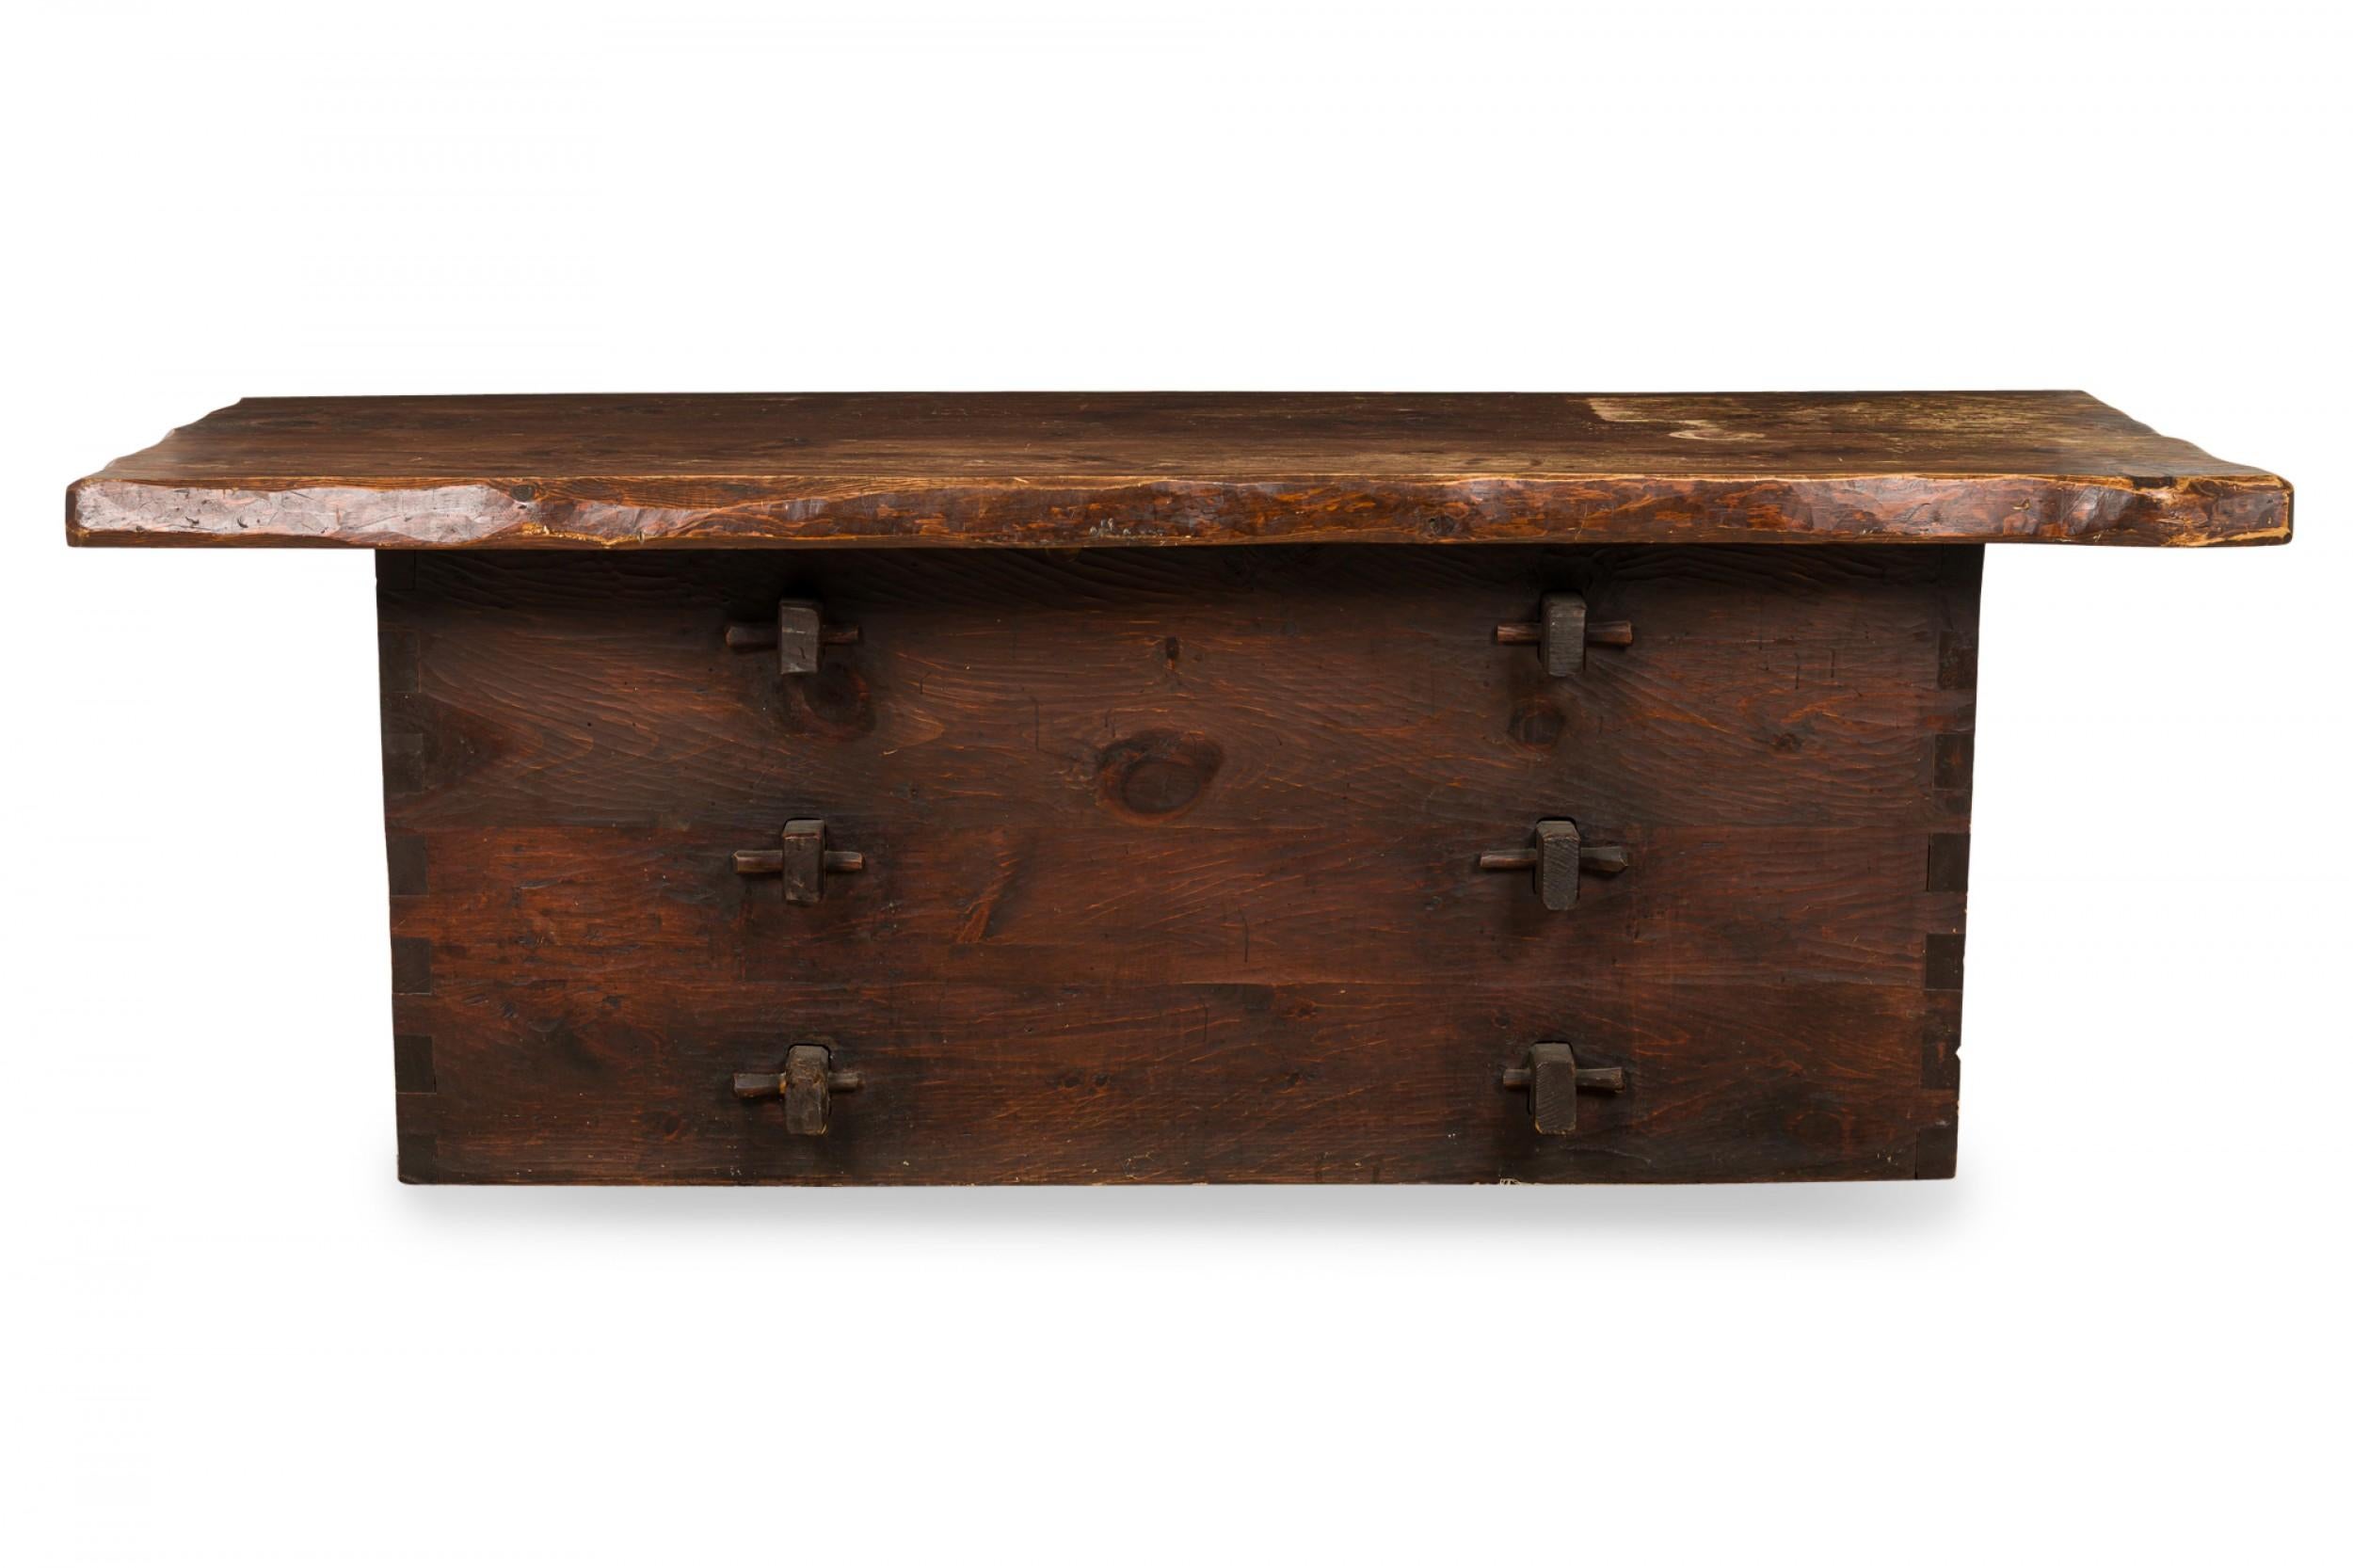 Rustic Adirondack Style Hewn Dark Stained Wooden Kneehole Desk In Good Condition For Sale In New York, NY